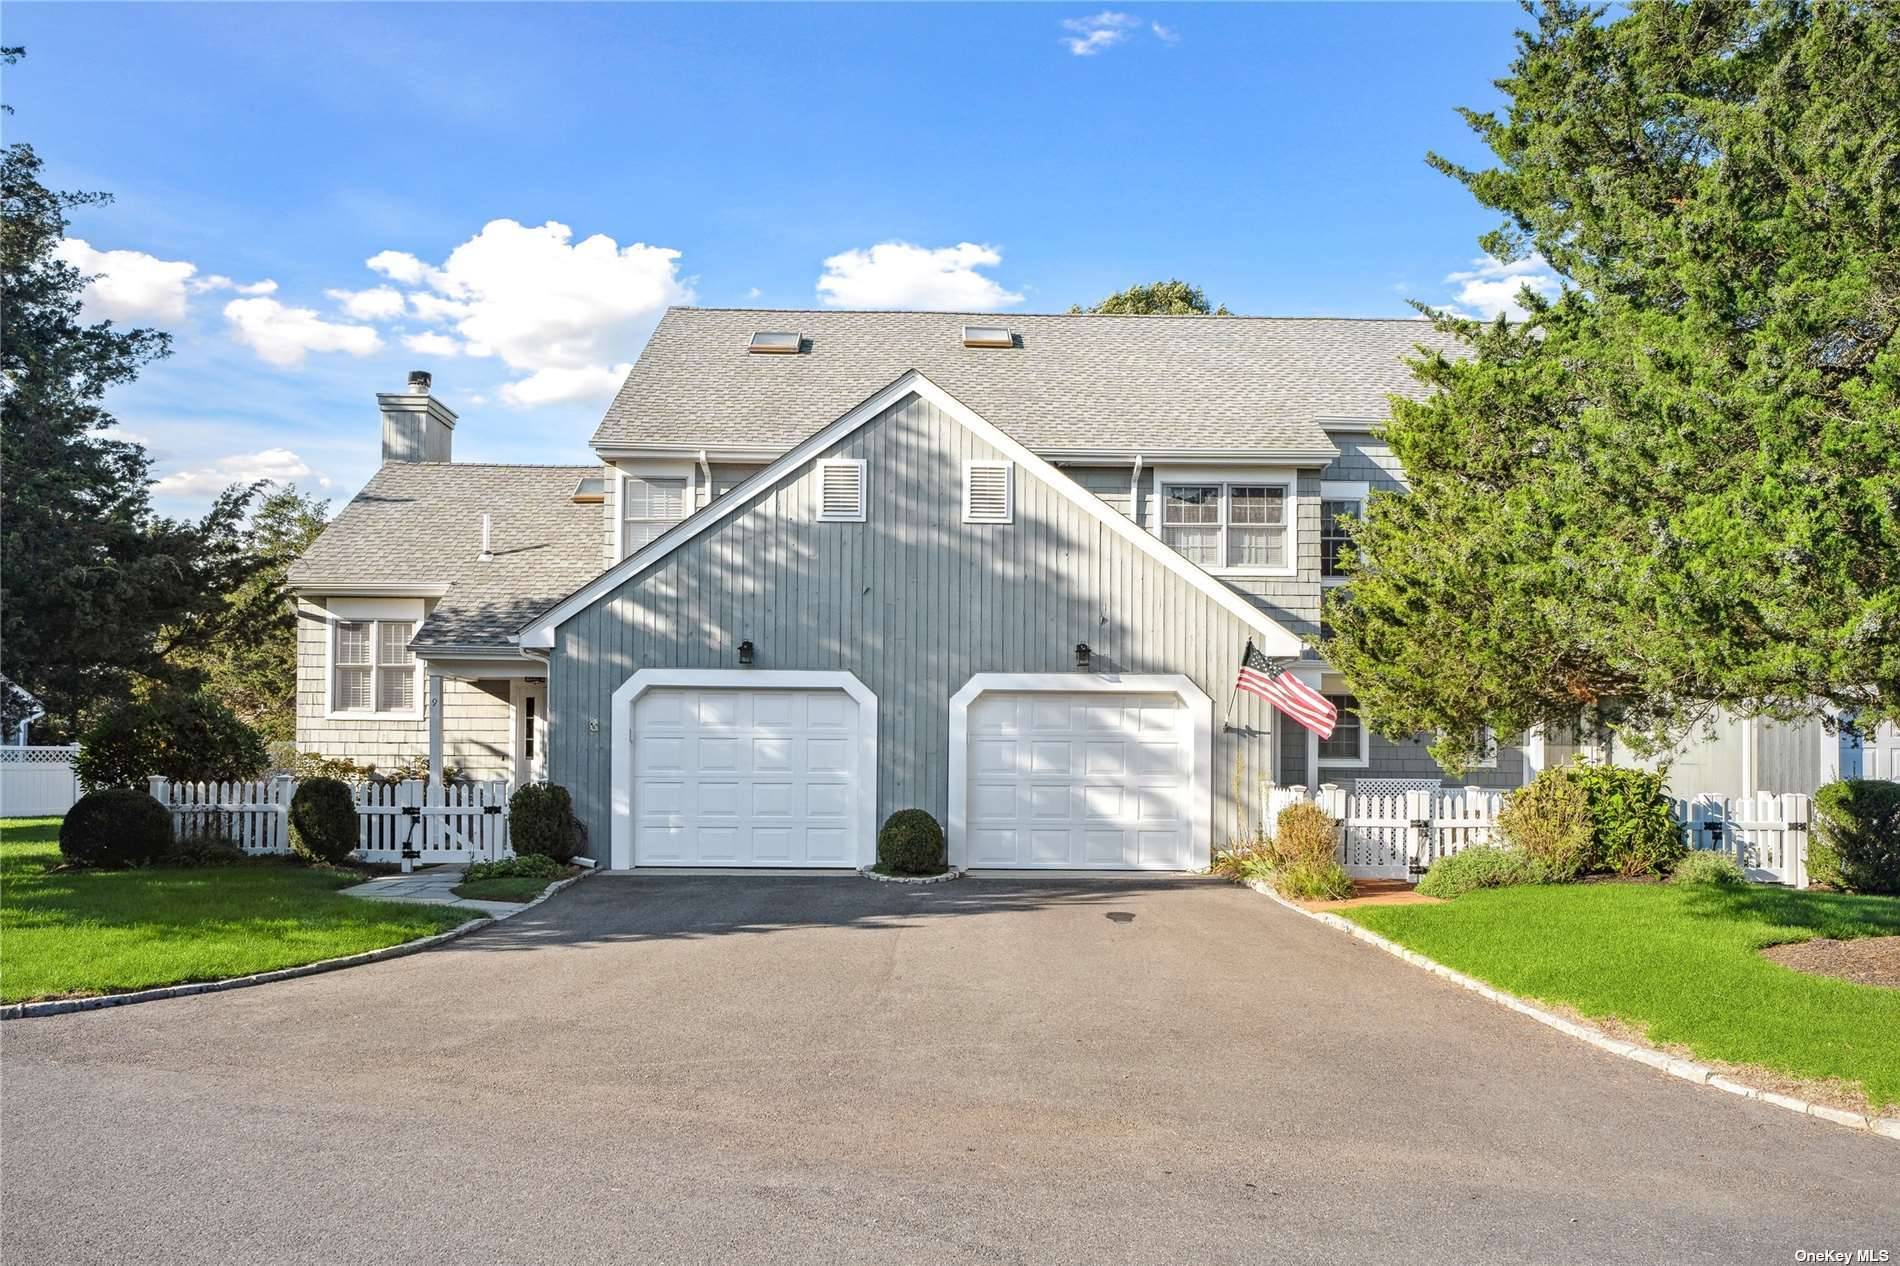 10 Brittany Lane in Westhampton Beach is a meticulously maintained, and recently updated condo located in the Patio Villas community offering two en suite bedrooms upstairs, an additional half bath ...